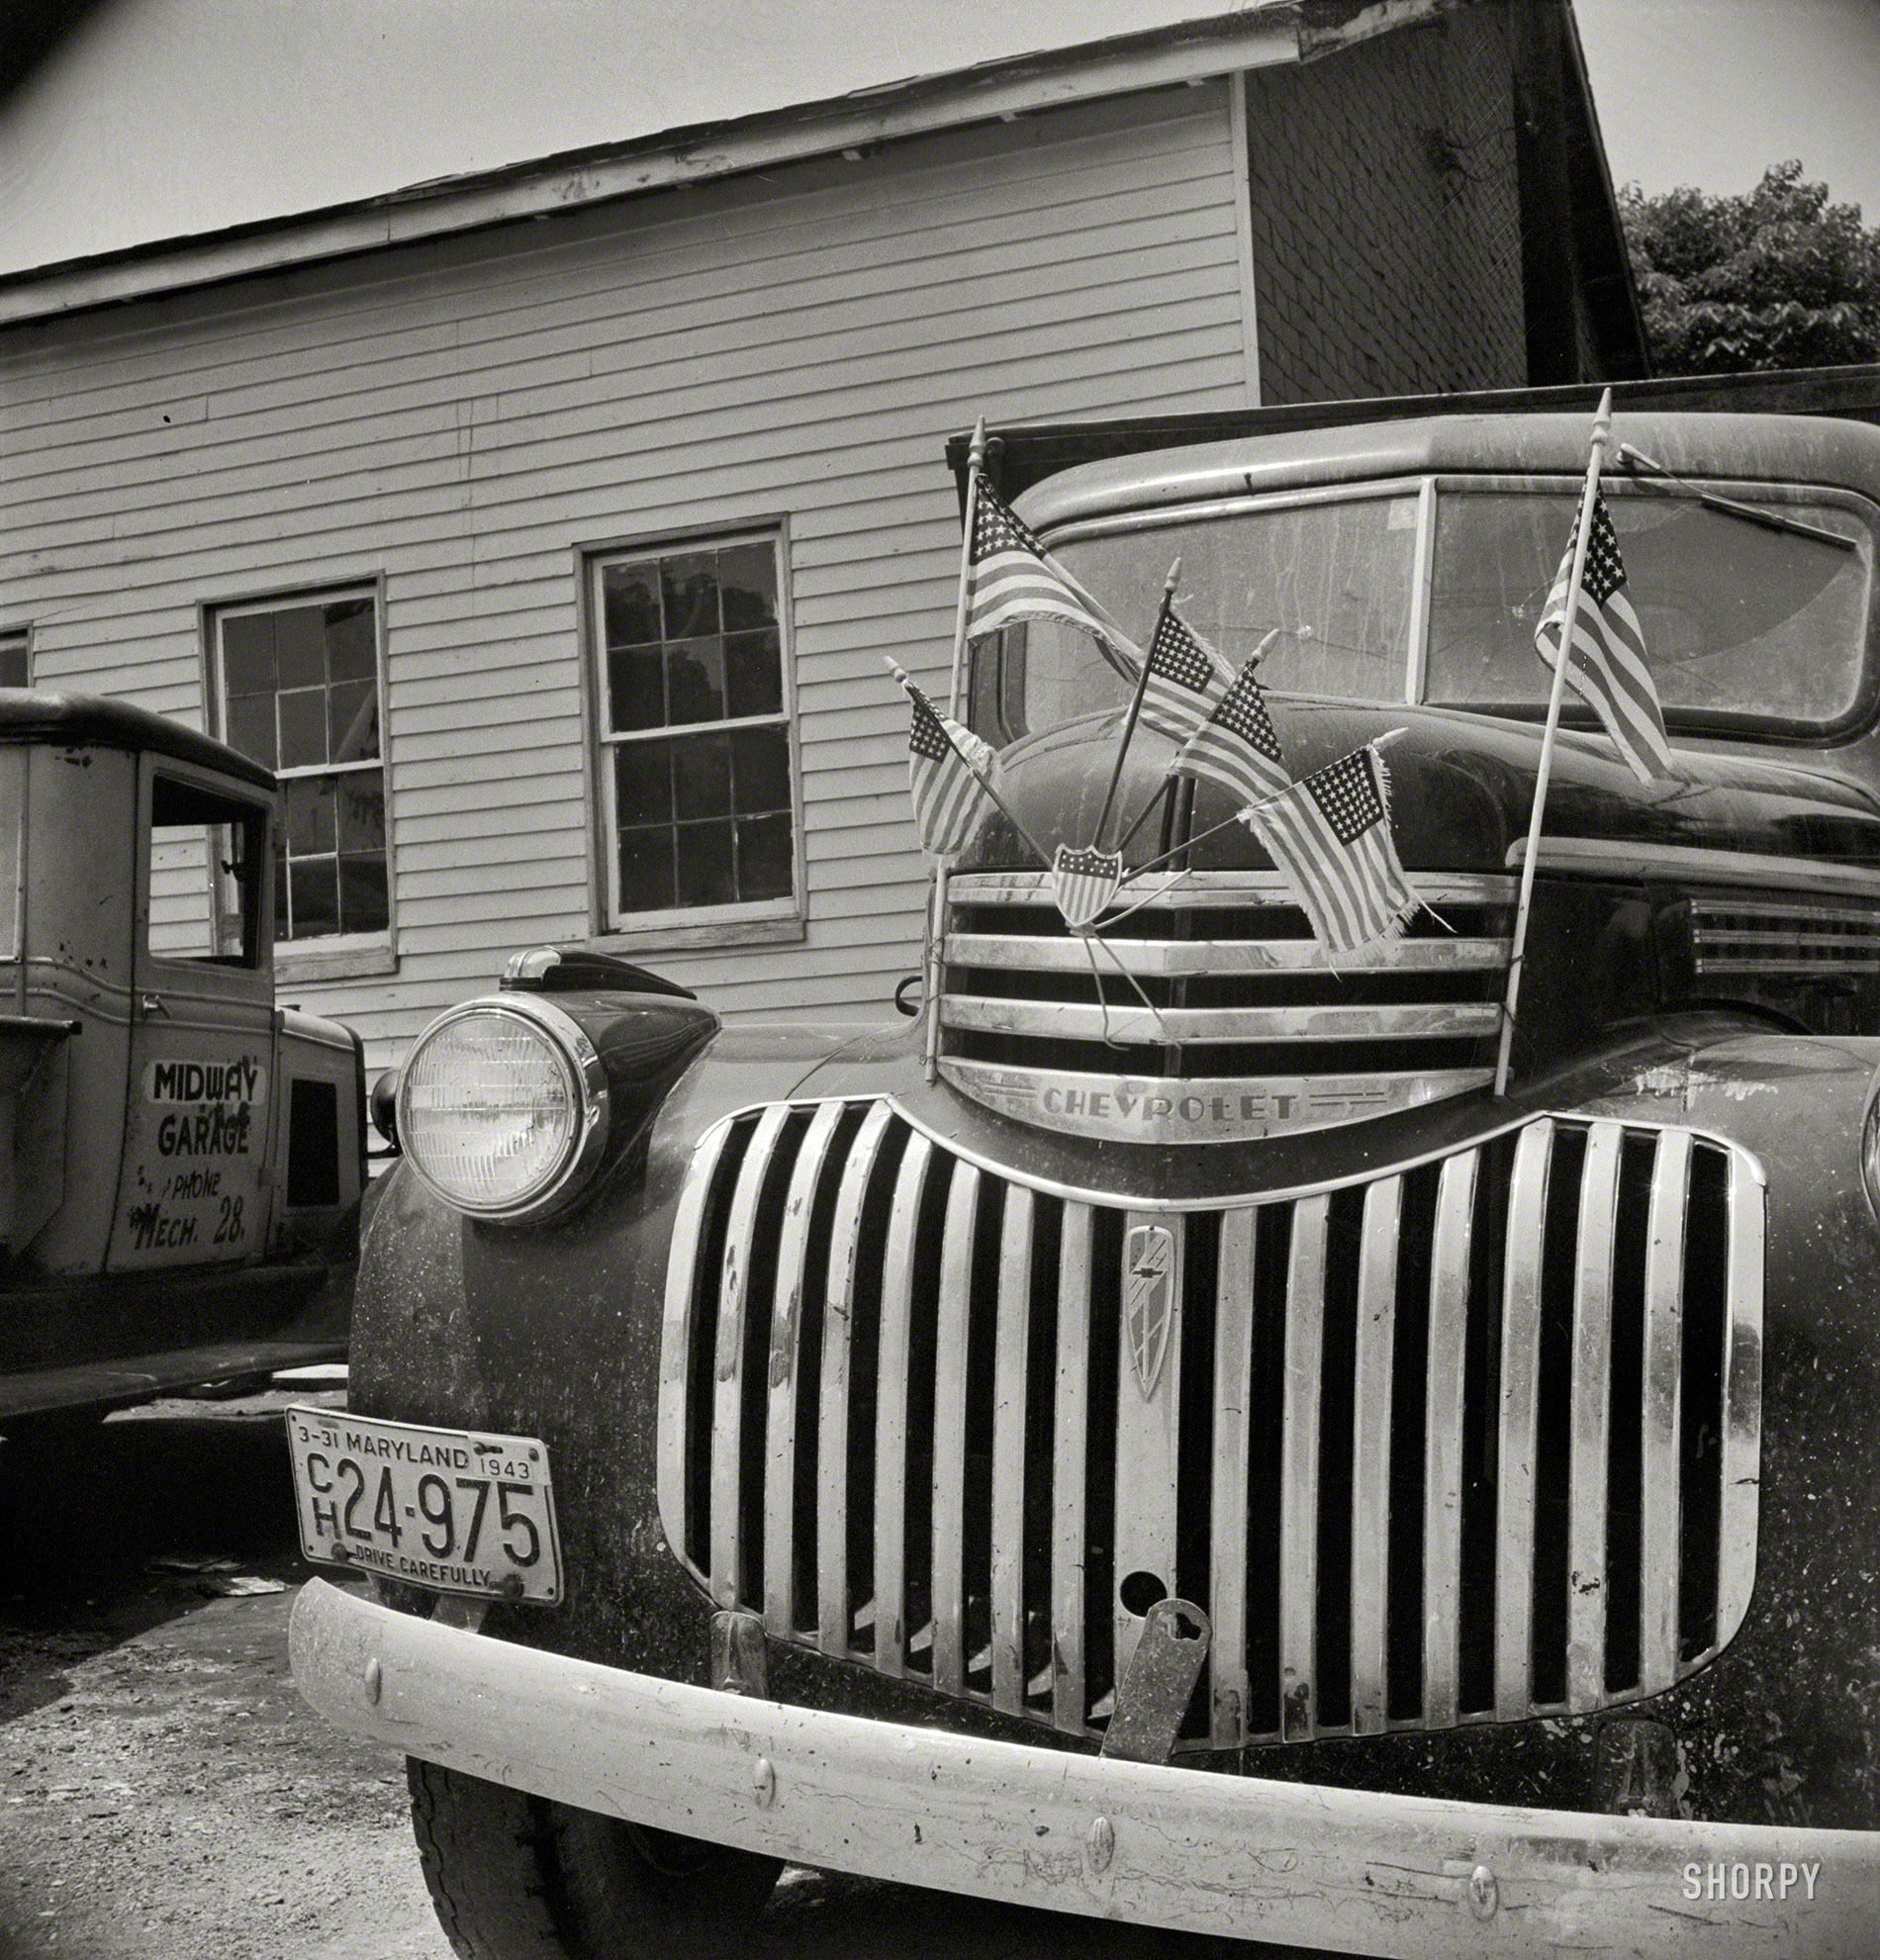 July 1942. "Service station in Mechanicsville, Md." Our second visit to the Midway Garage. Photo by Marjory Collins, Office of War Information. View full size.